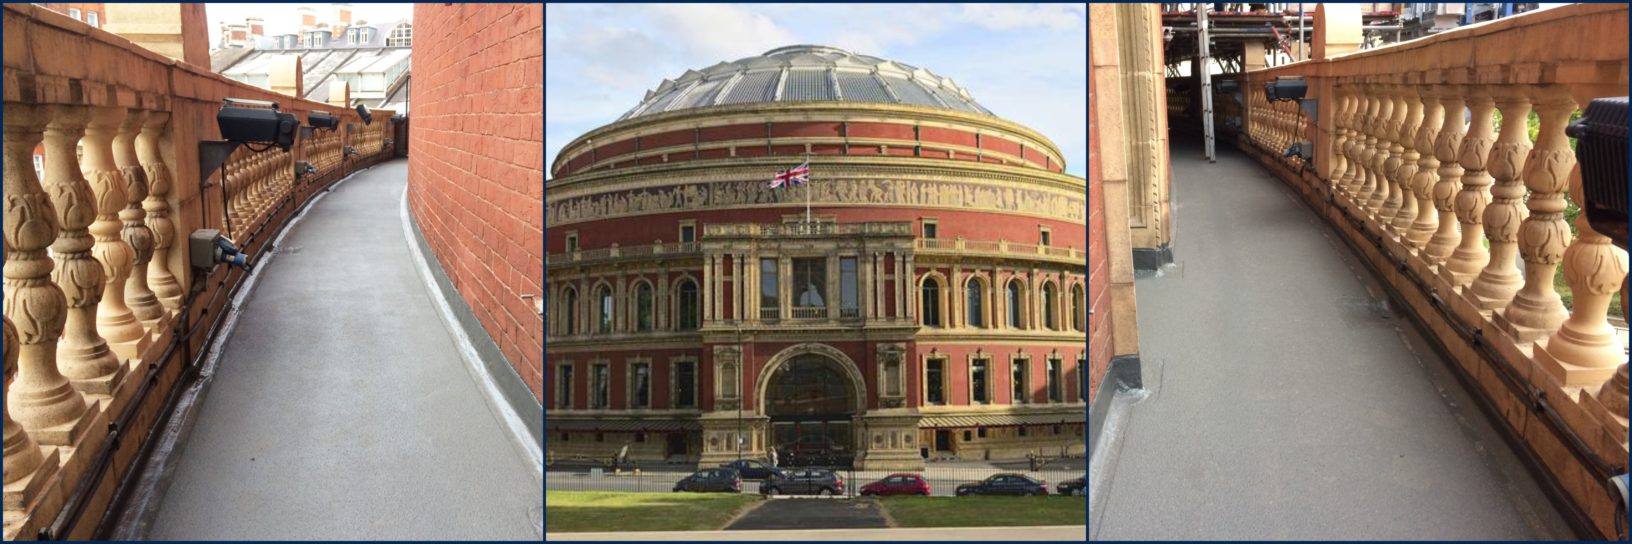 Iconic Structures - Royal Albert Hall